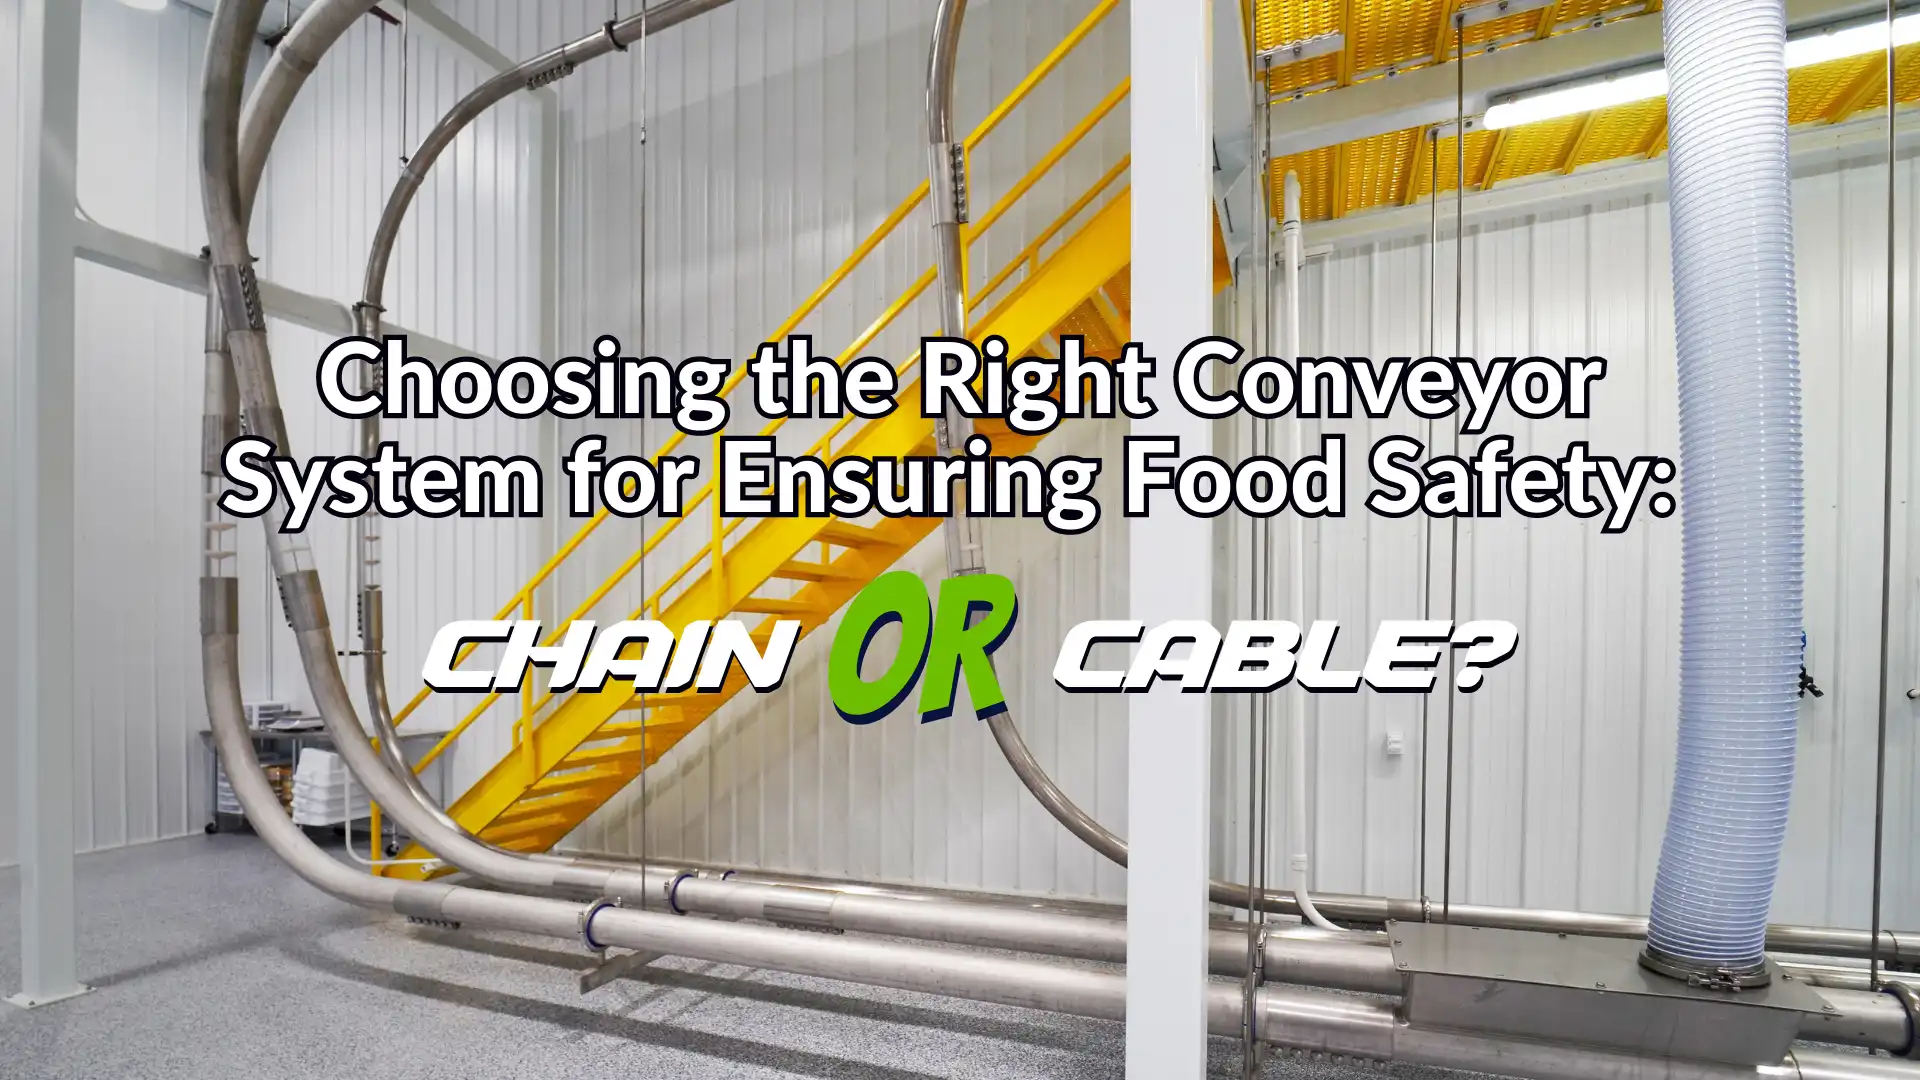 Choosing the Right Conveyor System for Ensuring Food Safety: Chain or Cable?